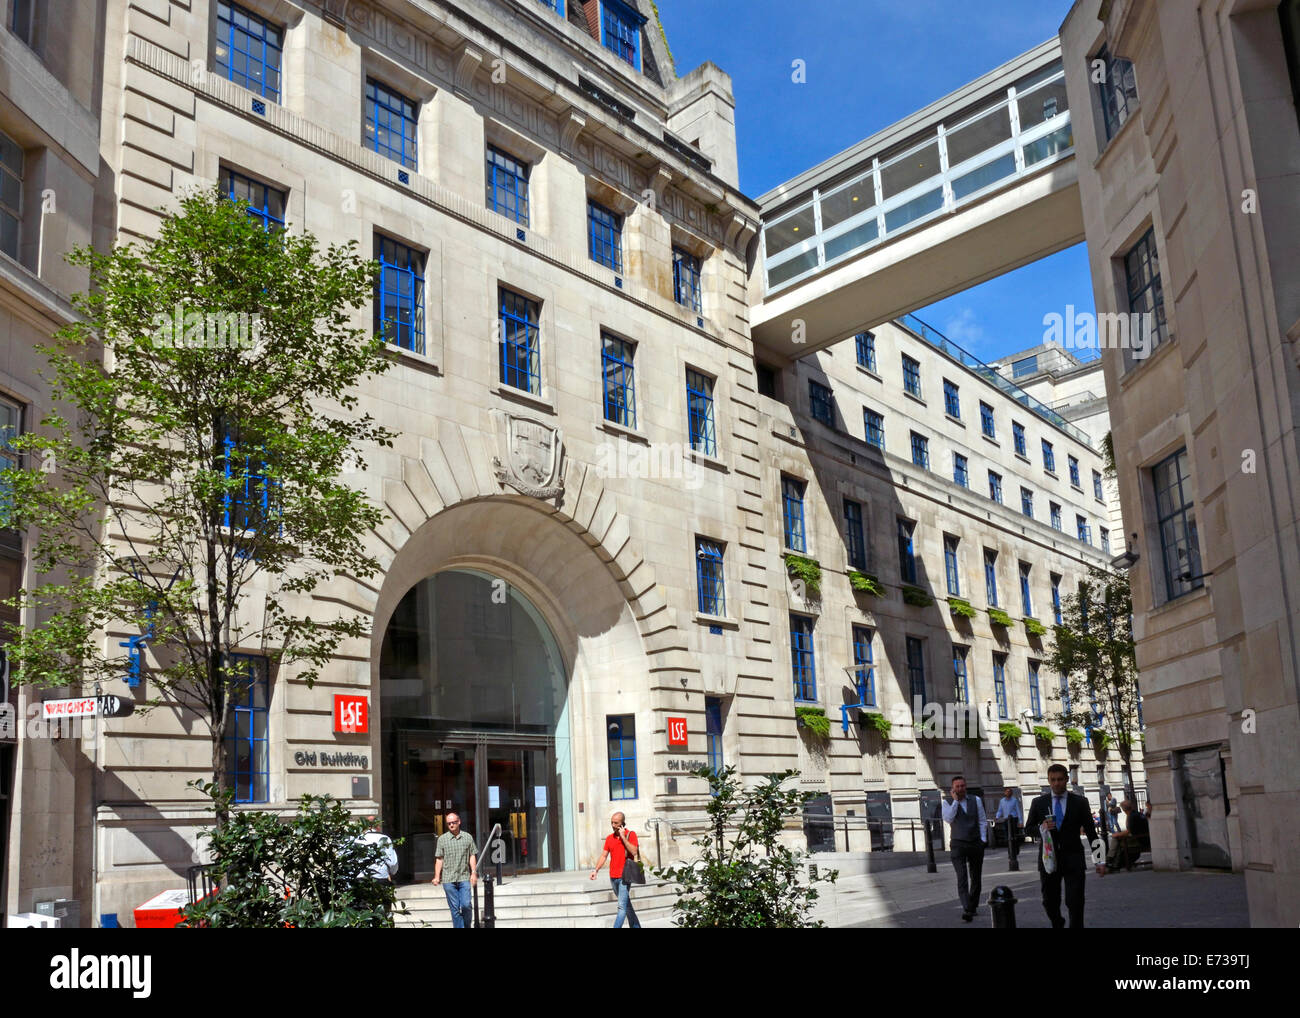 London, England, UK. London School of Economics and Political Science / LSE. 'Old Building' in Houghton Street Stock Photo